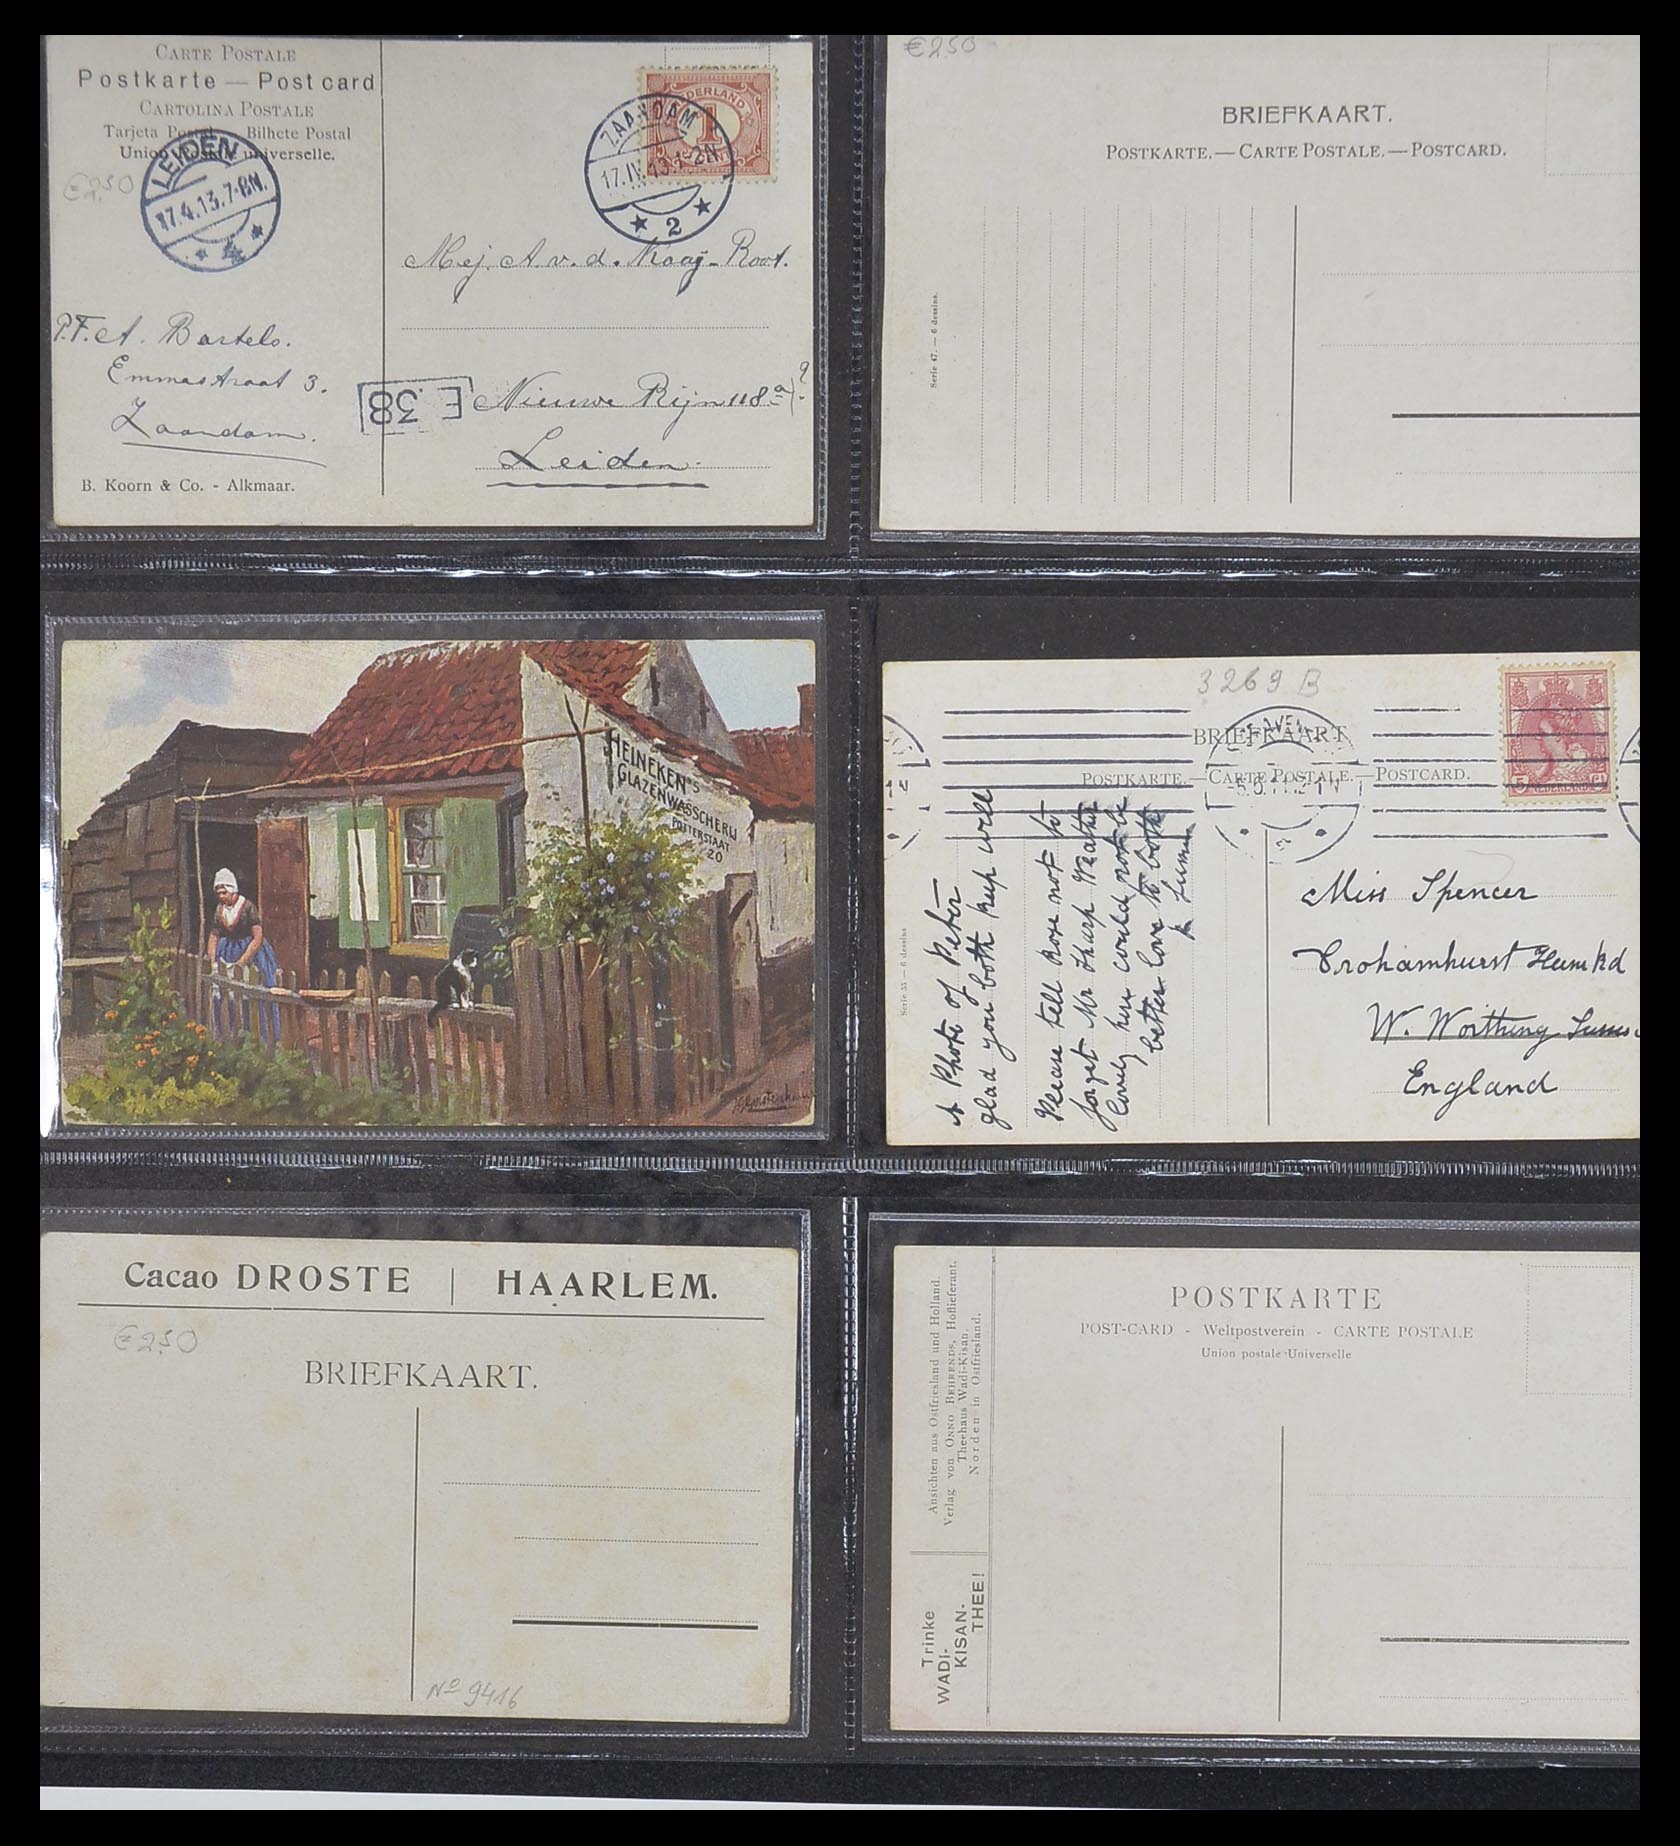 33928 081 - Stamp collection 33928 Netherlands picture postcards 1910-1930.